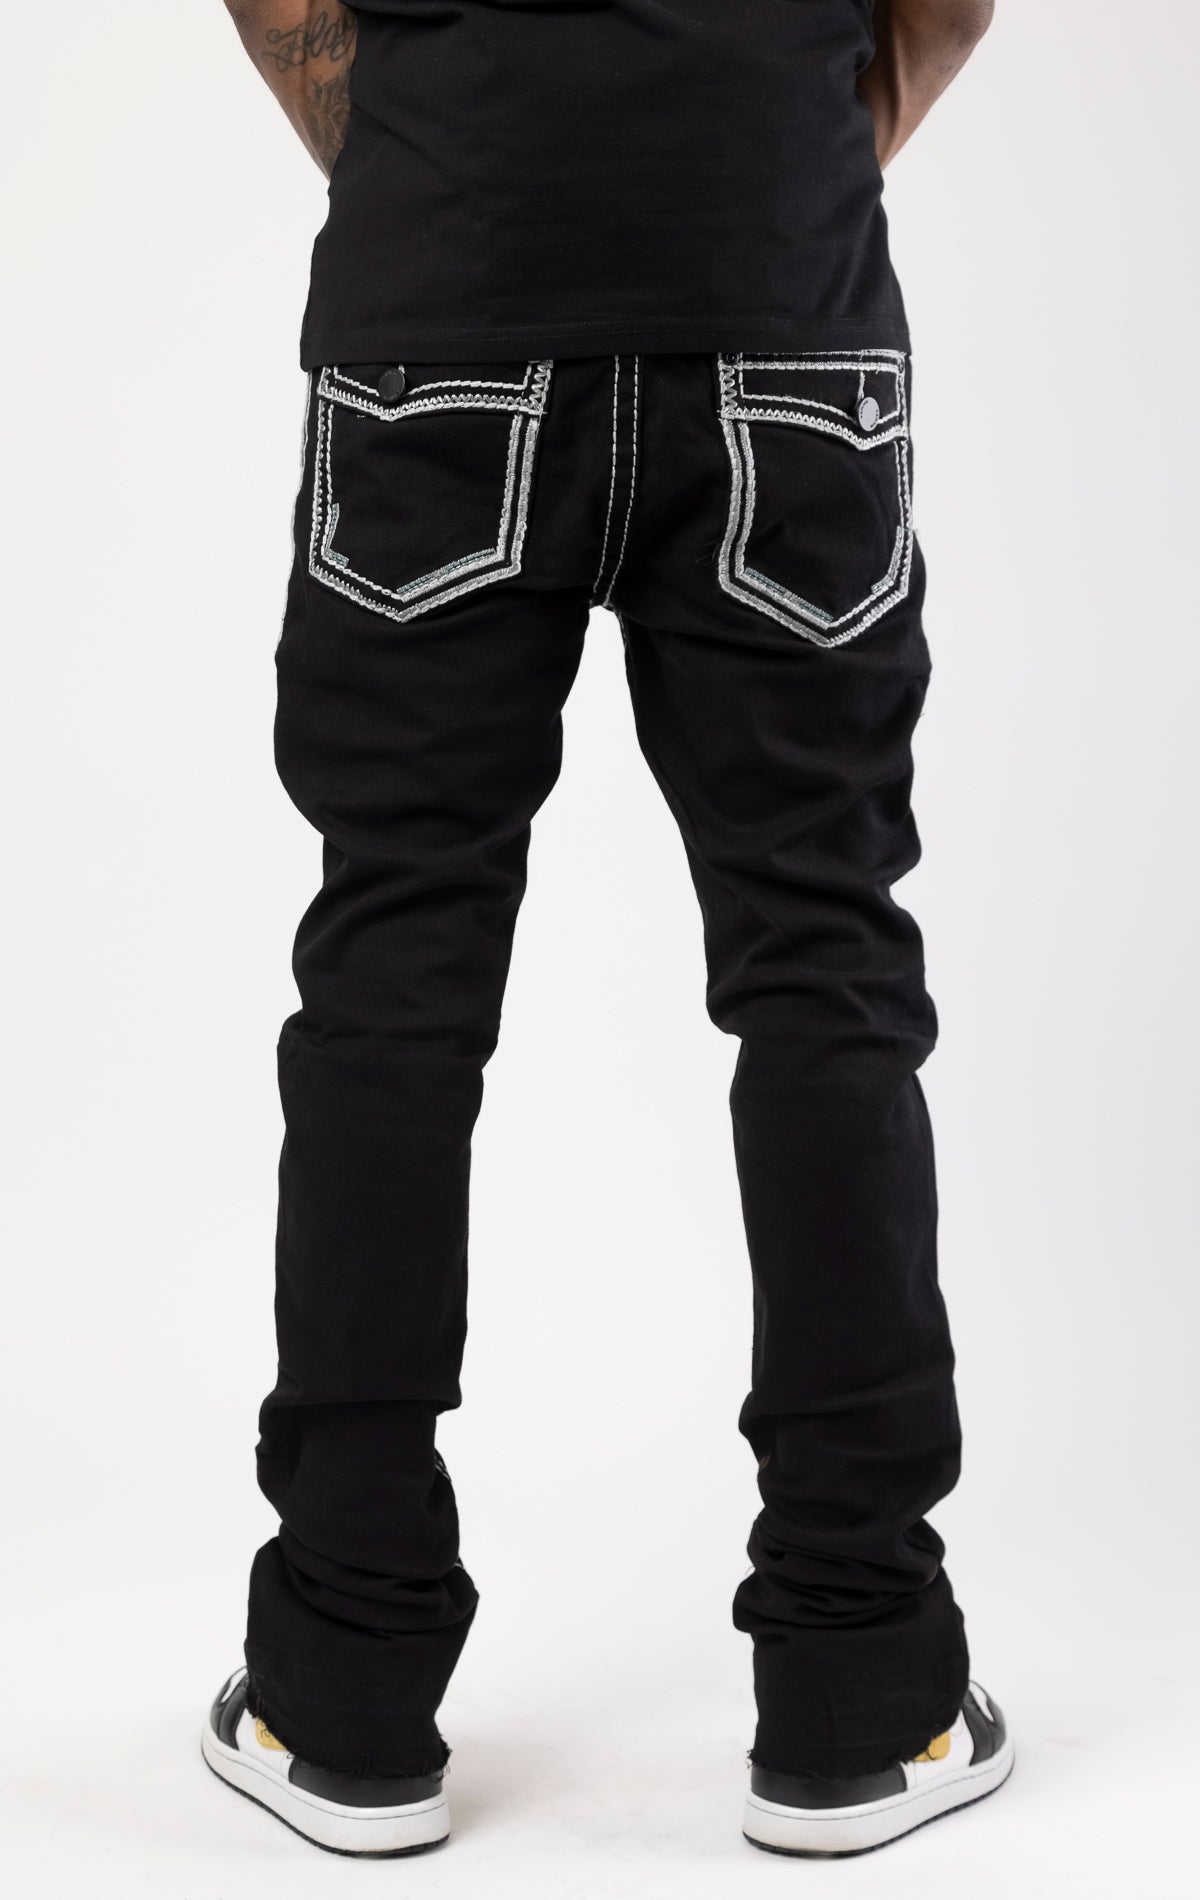 Stacked jeans with bold stitching details and flared bottom leg.